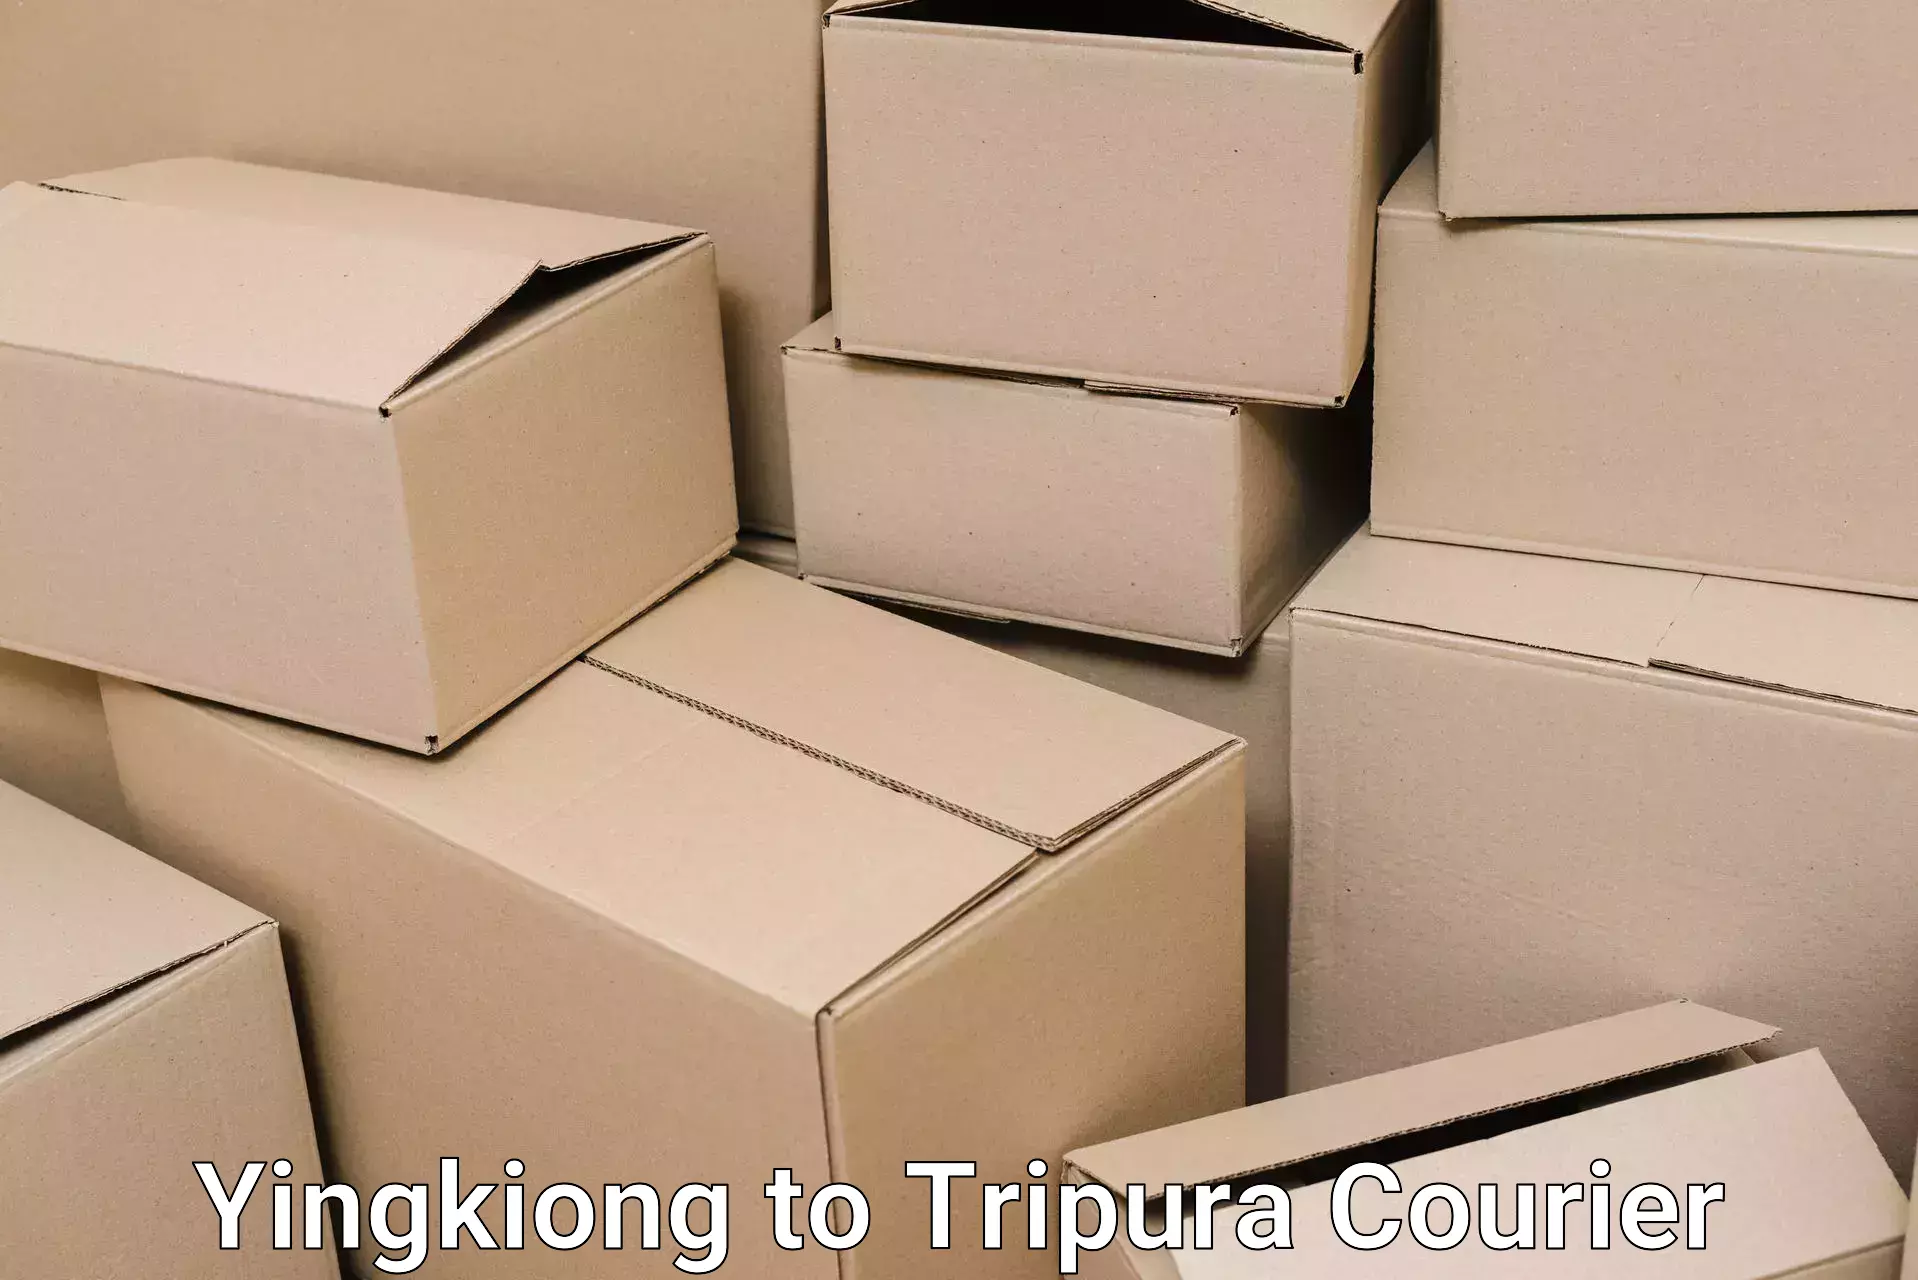 Home goods moving company Yingkiong to Tripura